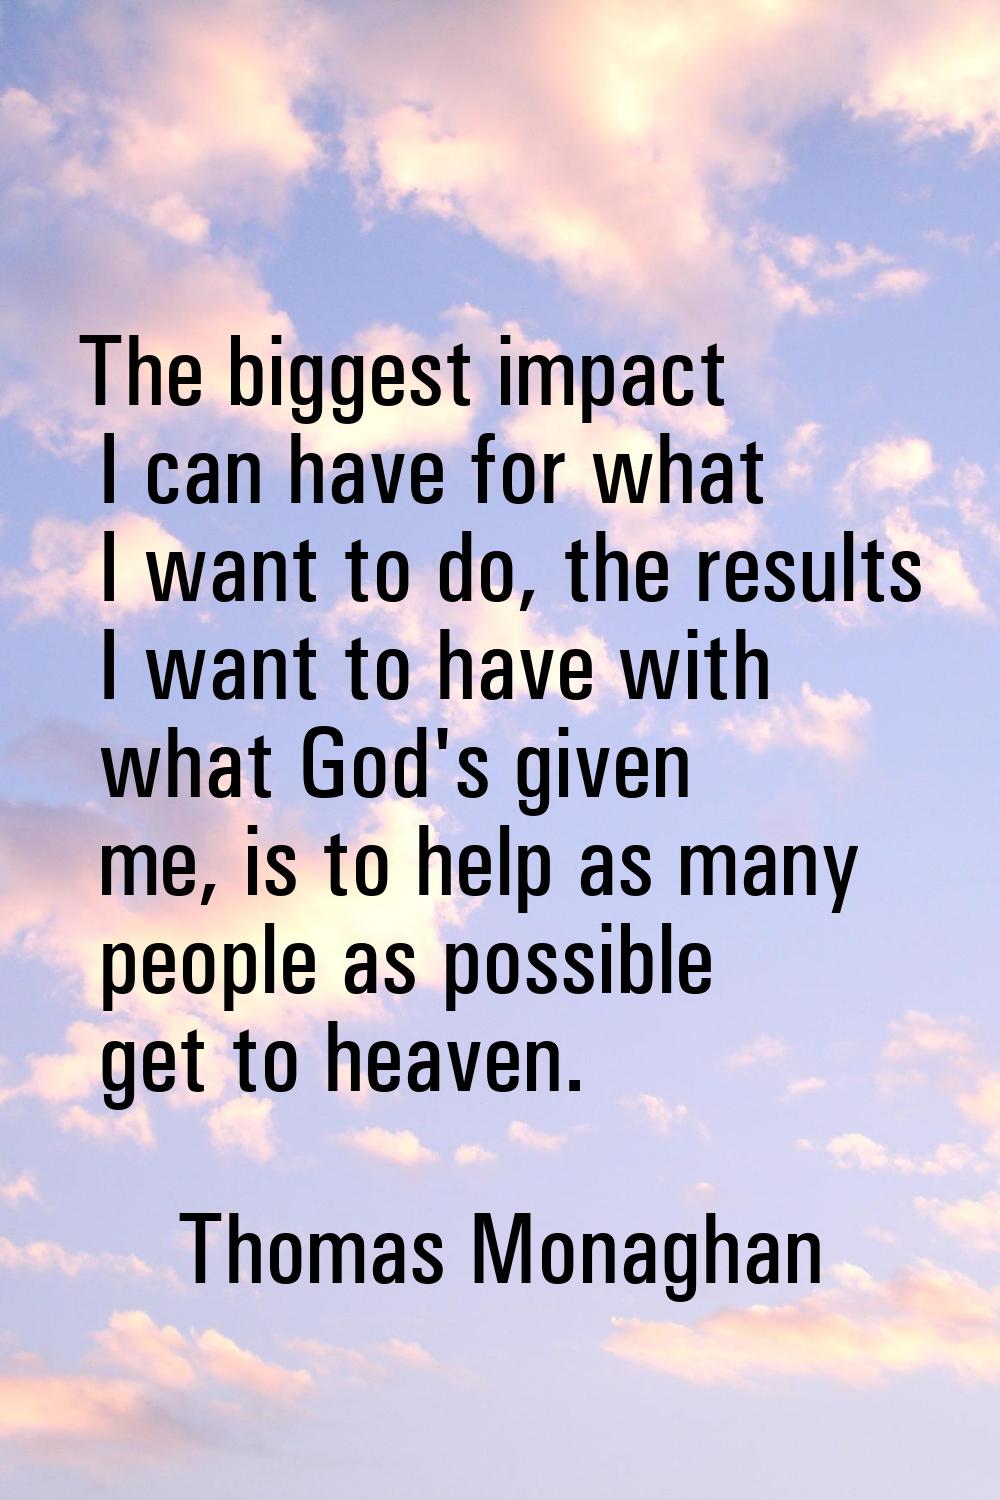 The biggest impact I can have for what I want to do, the results I want to have with what God's giv